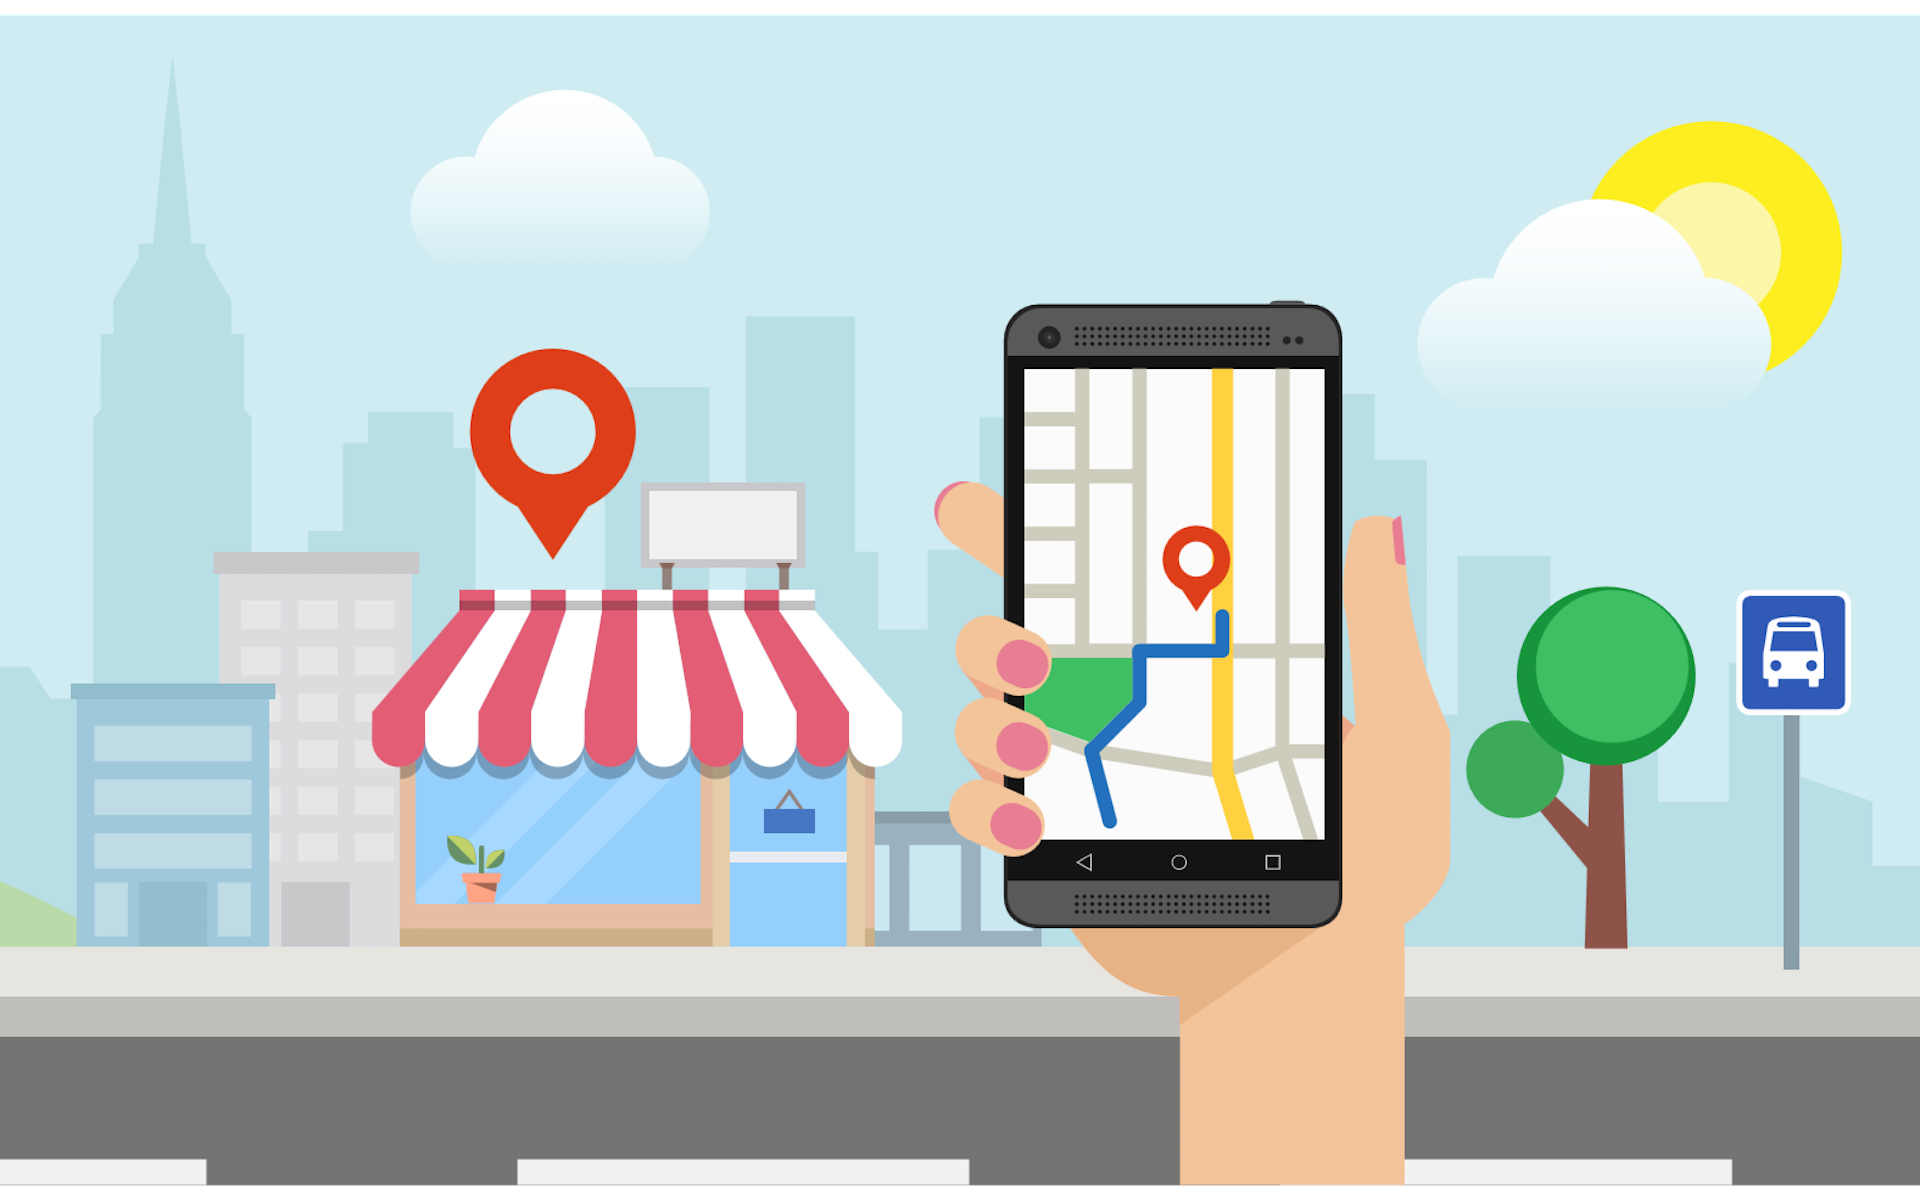 Google Places: Free and Easy small business promotion